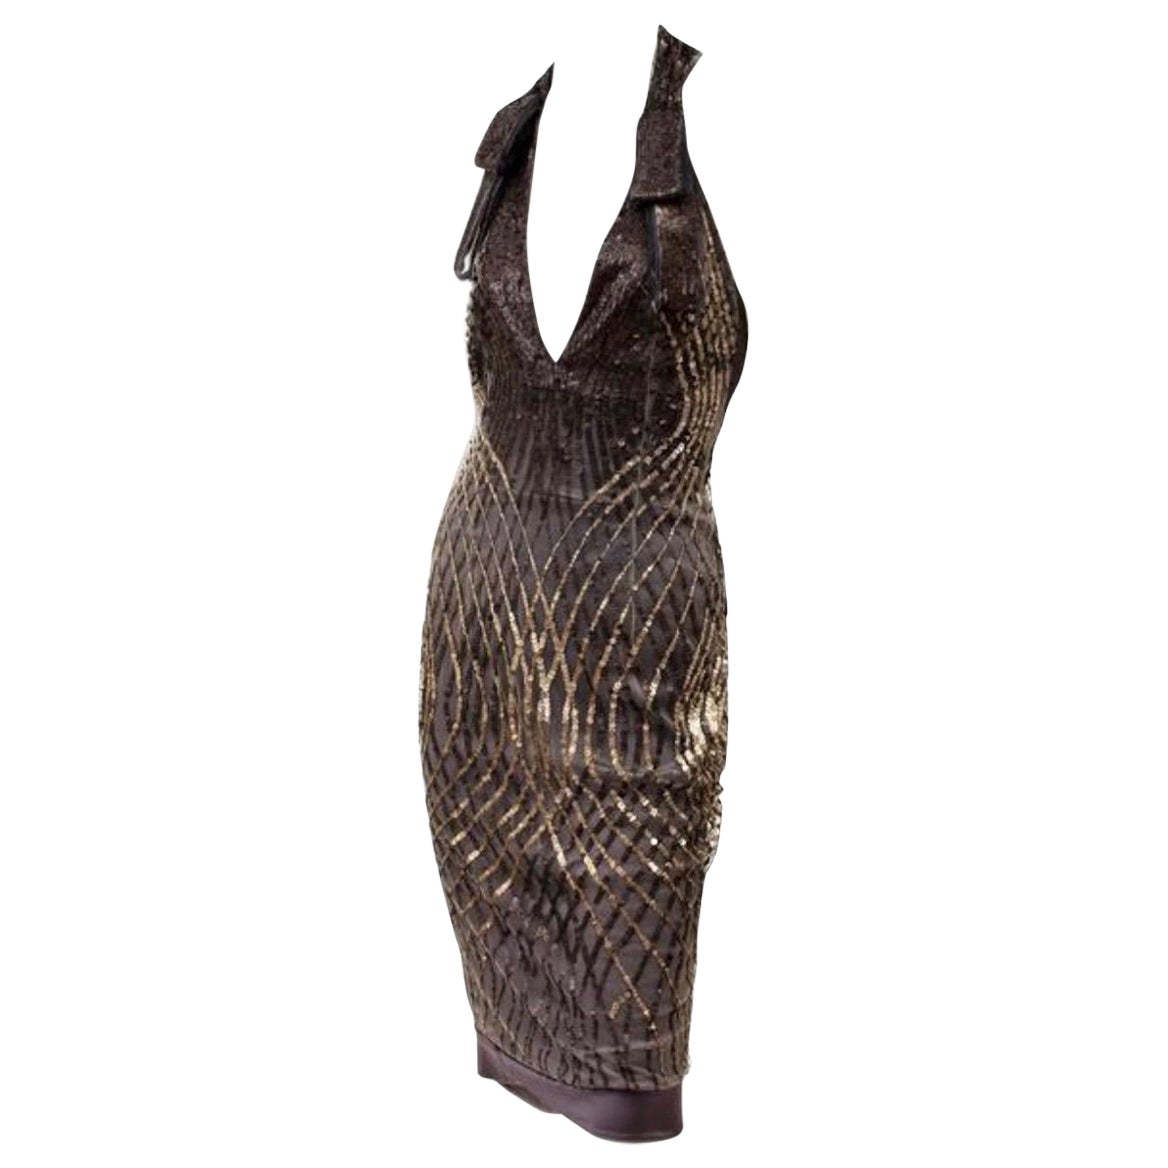 F/W 2005 Vintage GUCCI Sequin Embellished Dress by Alessandra Facchinetti For Sale